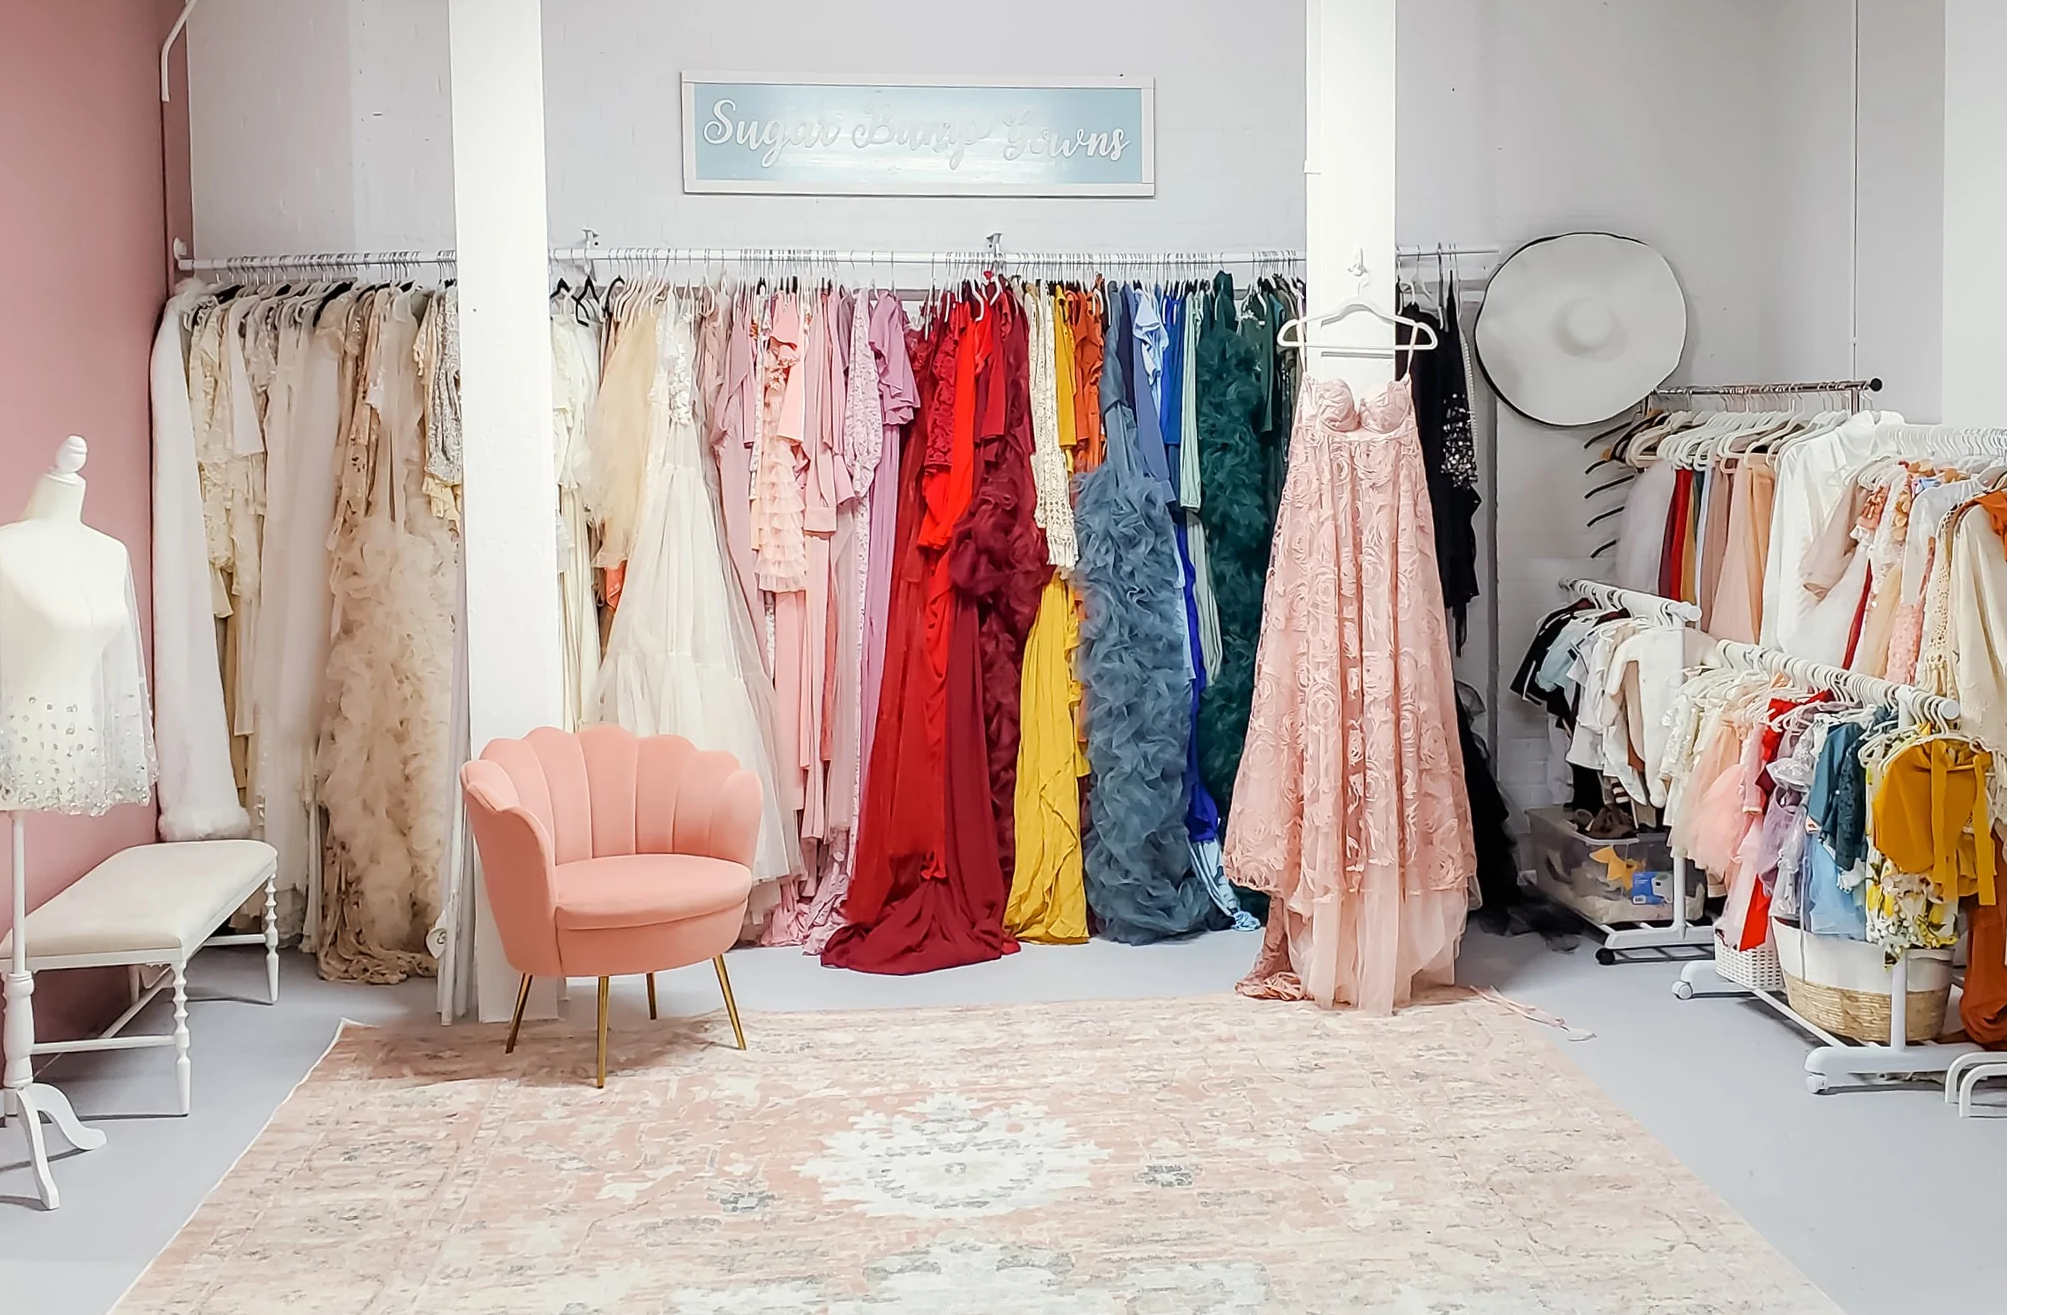 large collection of maternity photoshoot dresses in Stephanie Hope's photography studio